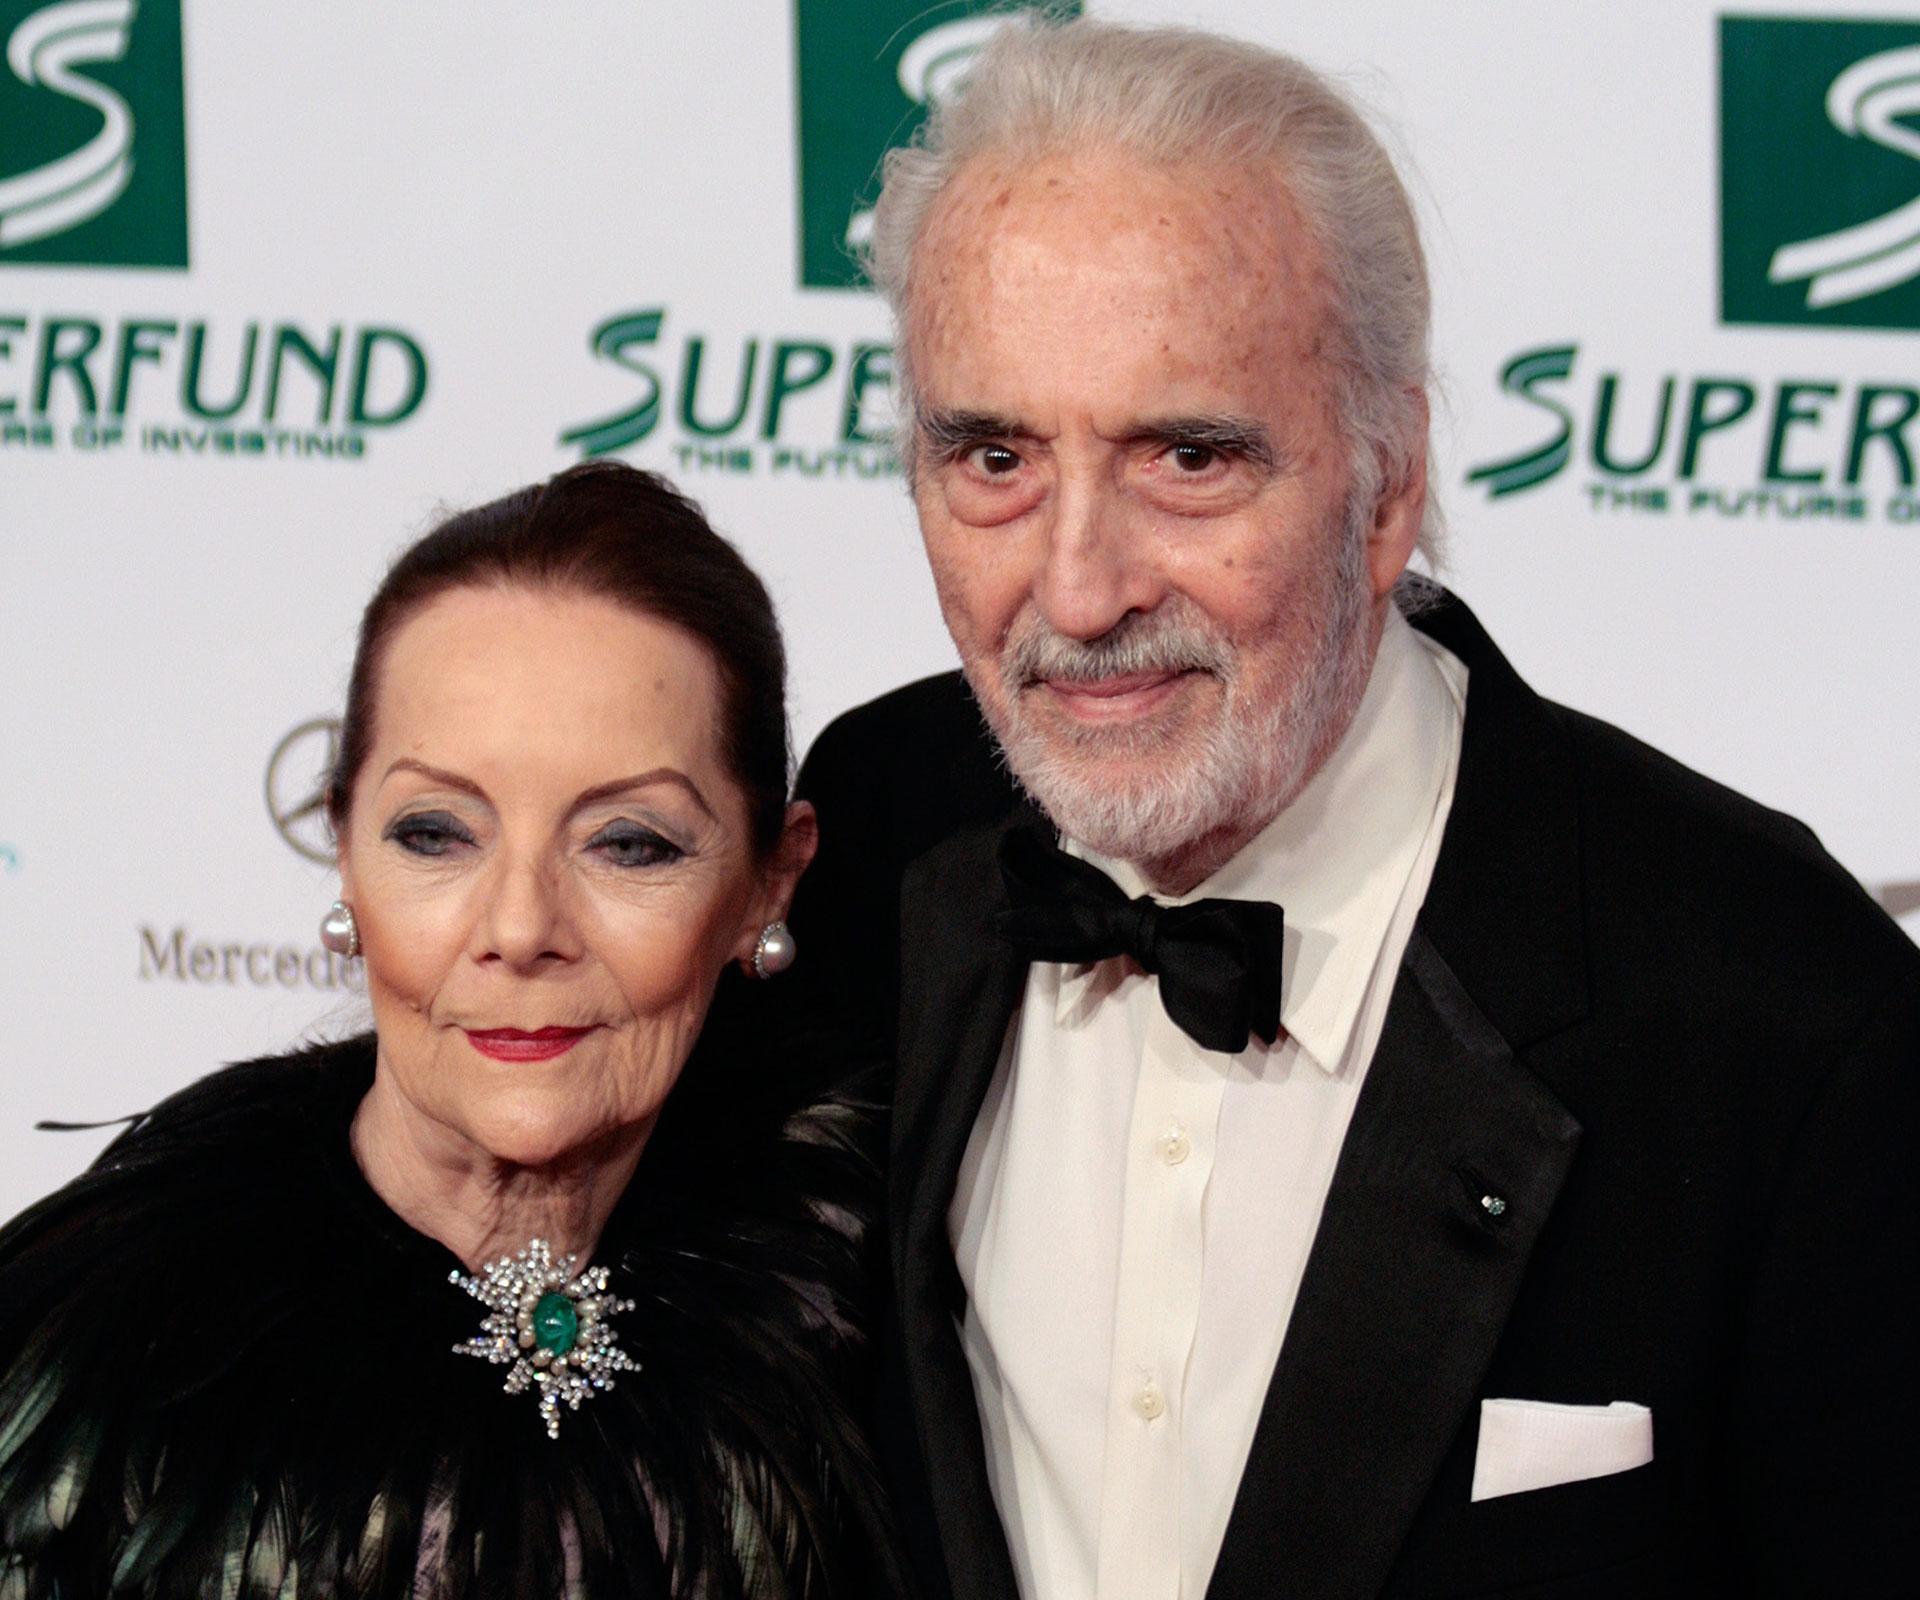 Christopher Lee dies at the age of 93